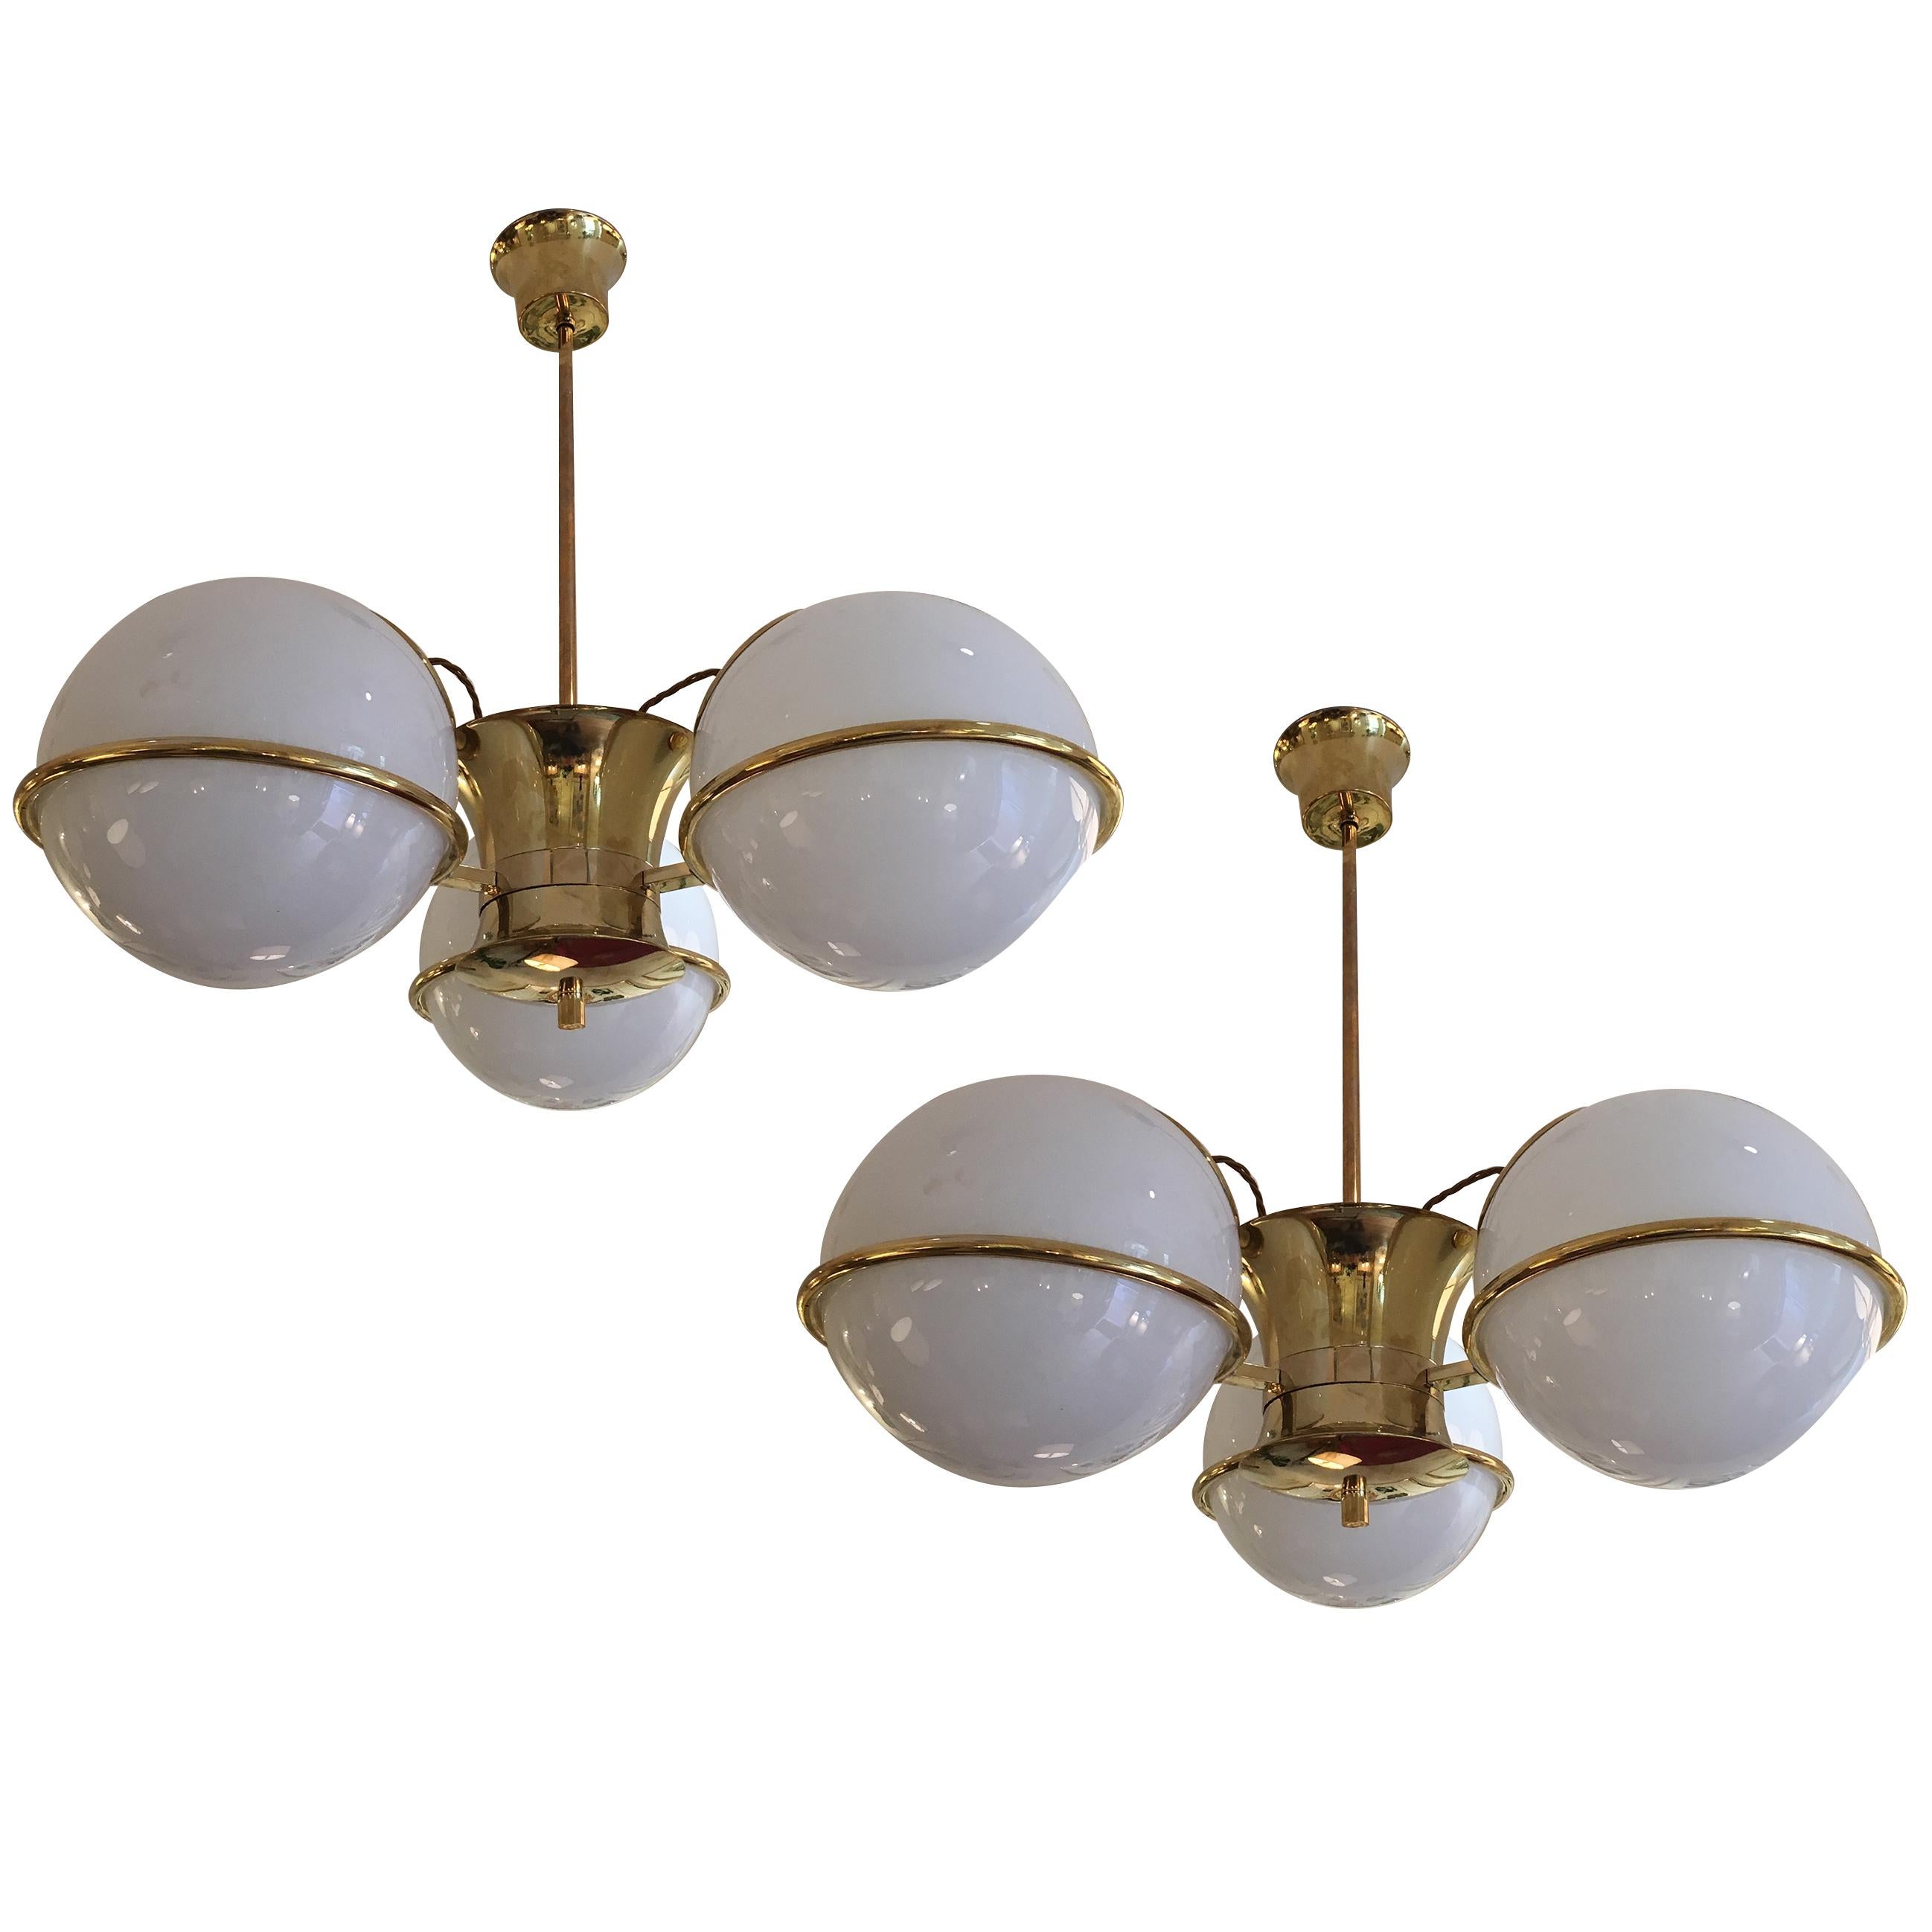 Pair of Midcentury Brass and Glass Globe Chandeliers